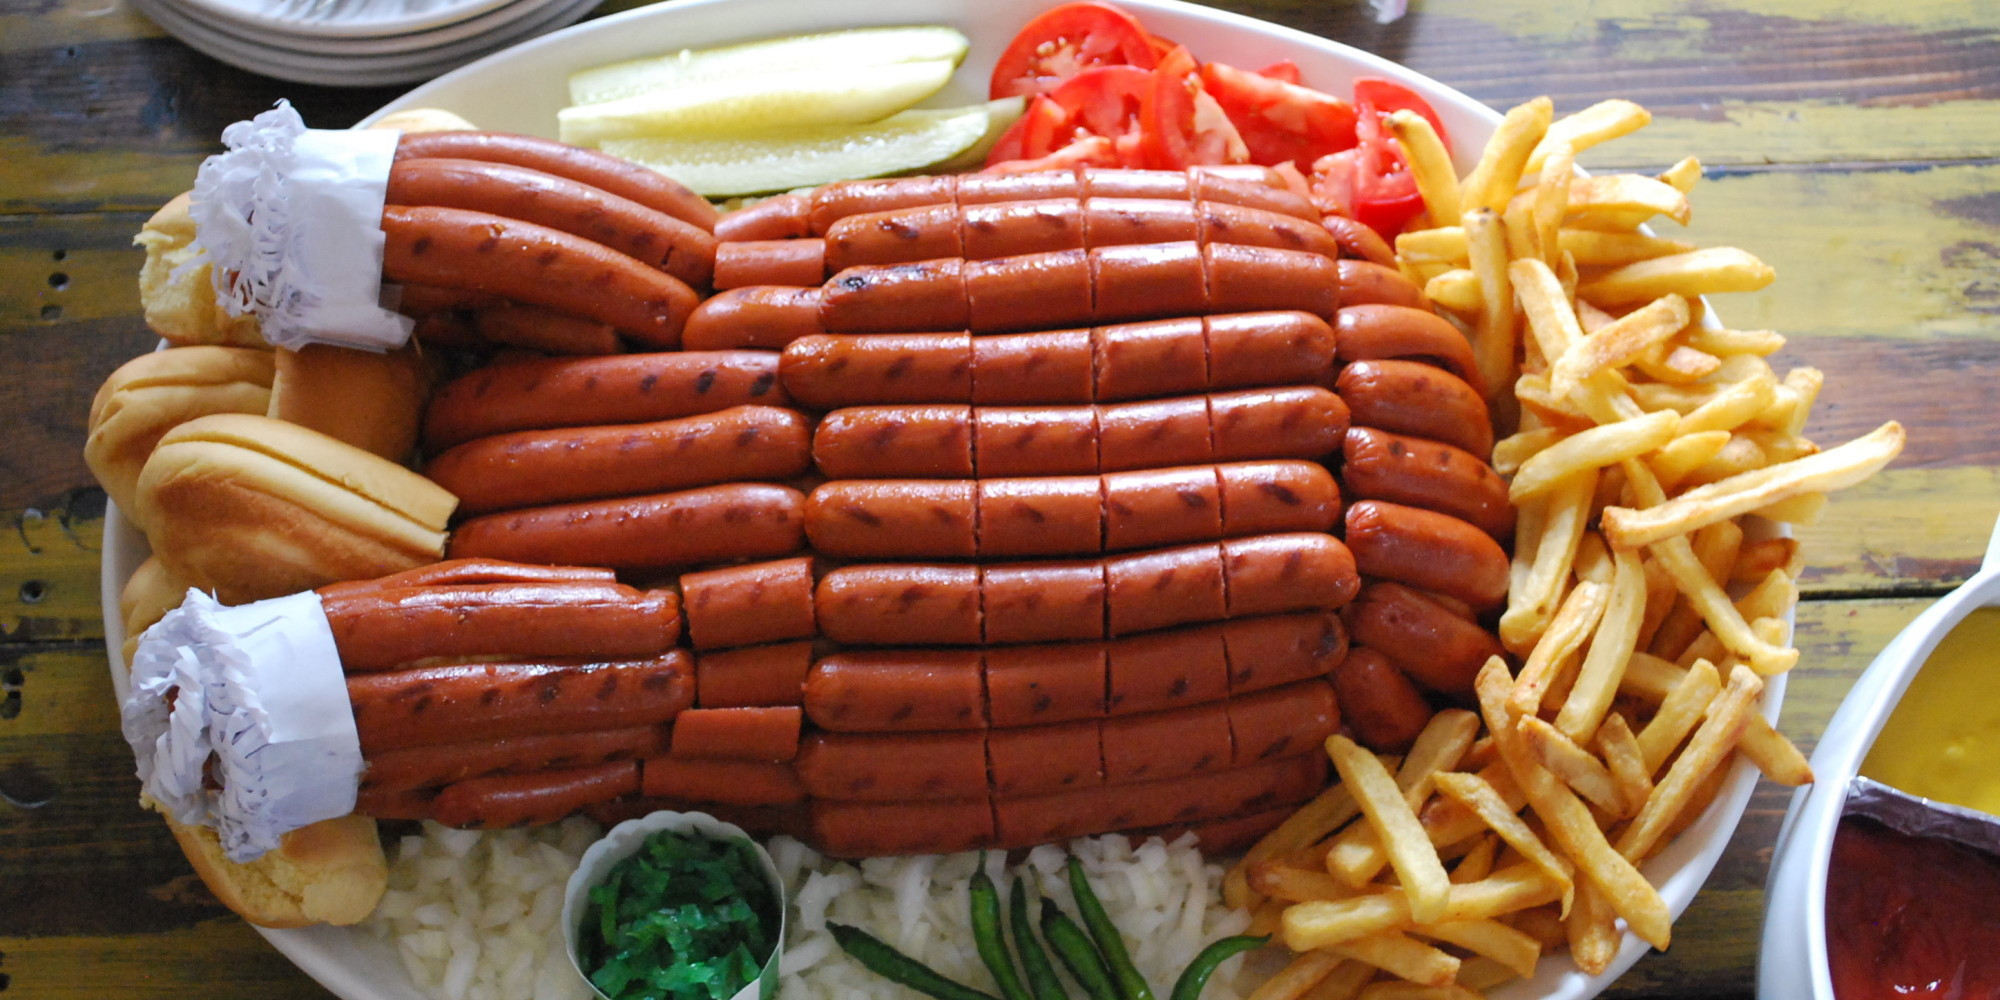 Turkey Hot Dogs
 This Is A Turkey Made Out Hot Dogs